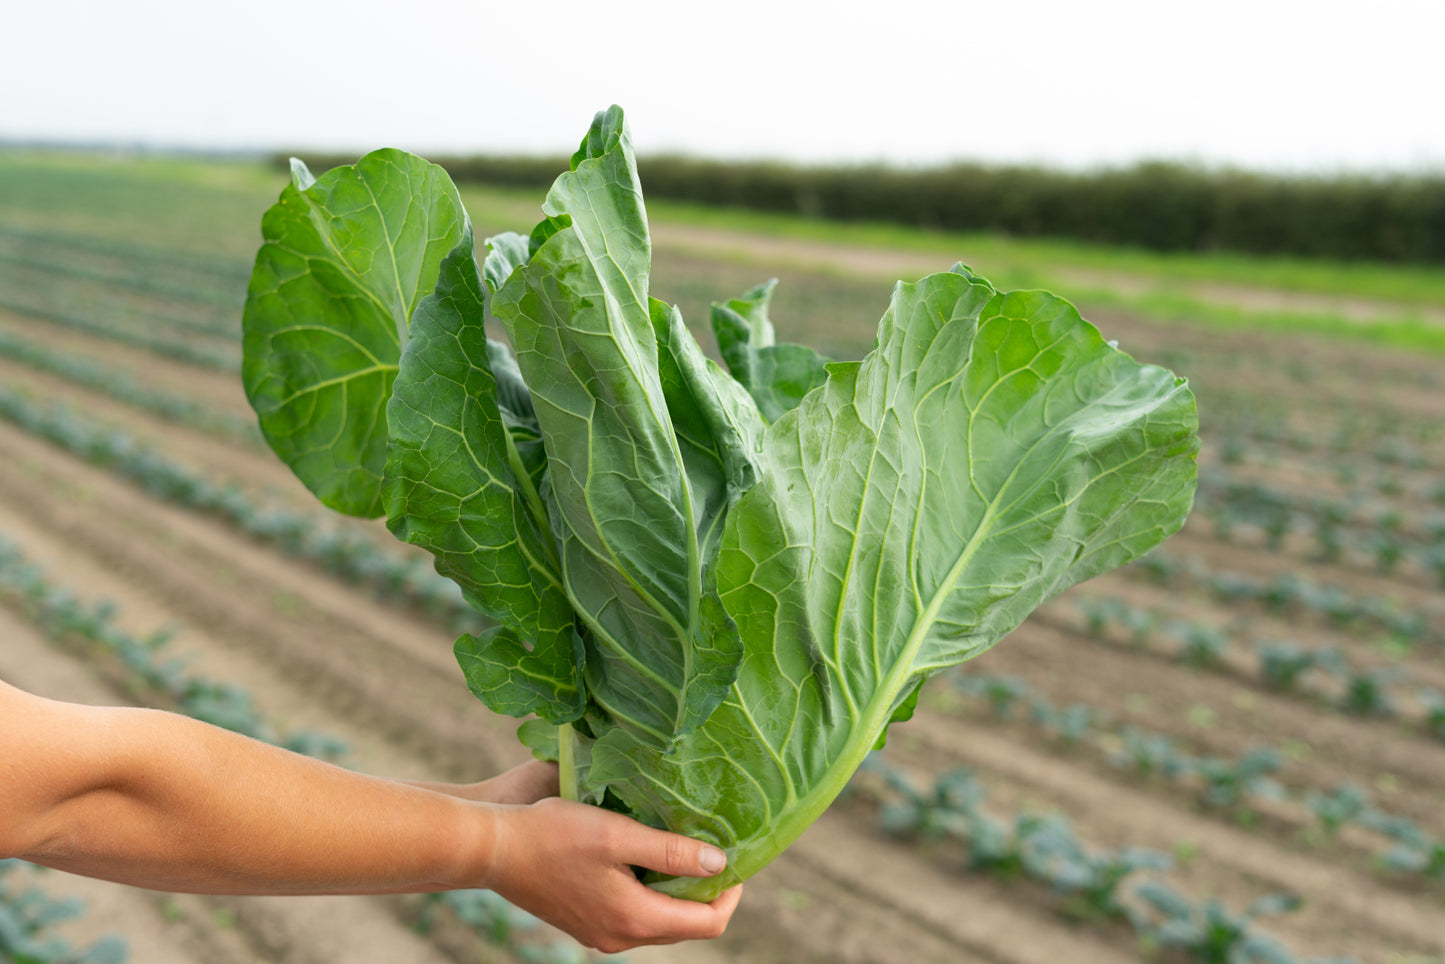 Spring Cabbage Plug Plants - "Grow Your Own" Vegetables **Letterbox Friendly**